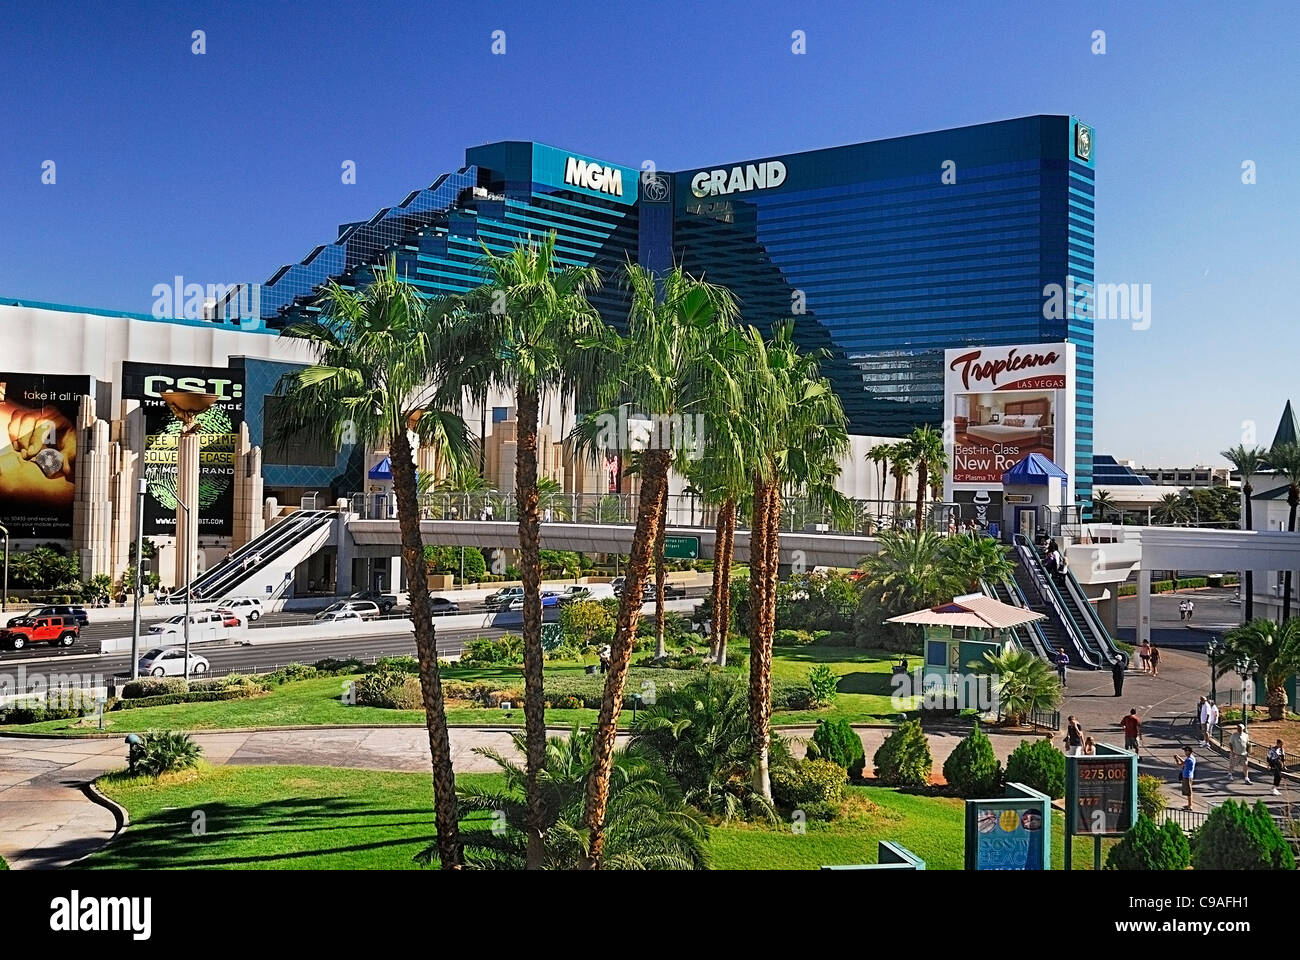 USA, Nevada, Las Vegas, The Strip, exterior of the MGM Grand hotel and casino. Stock Photo